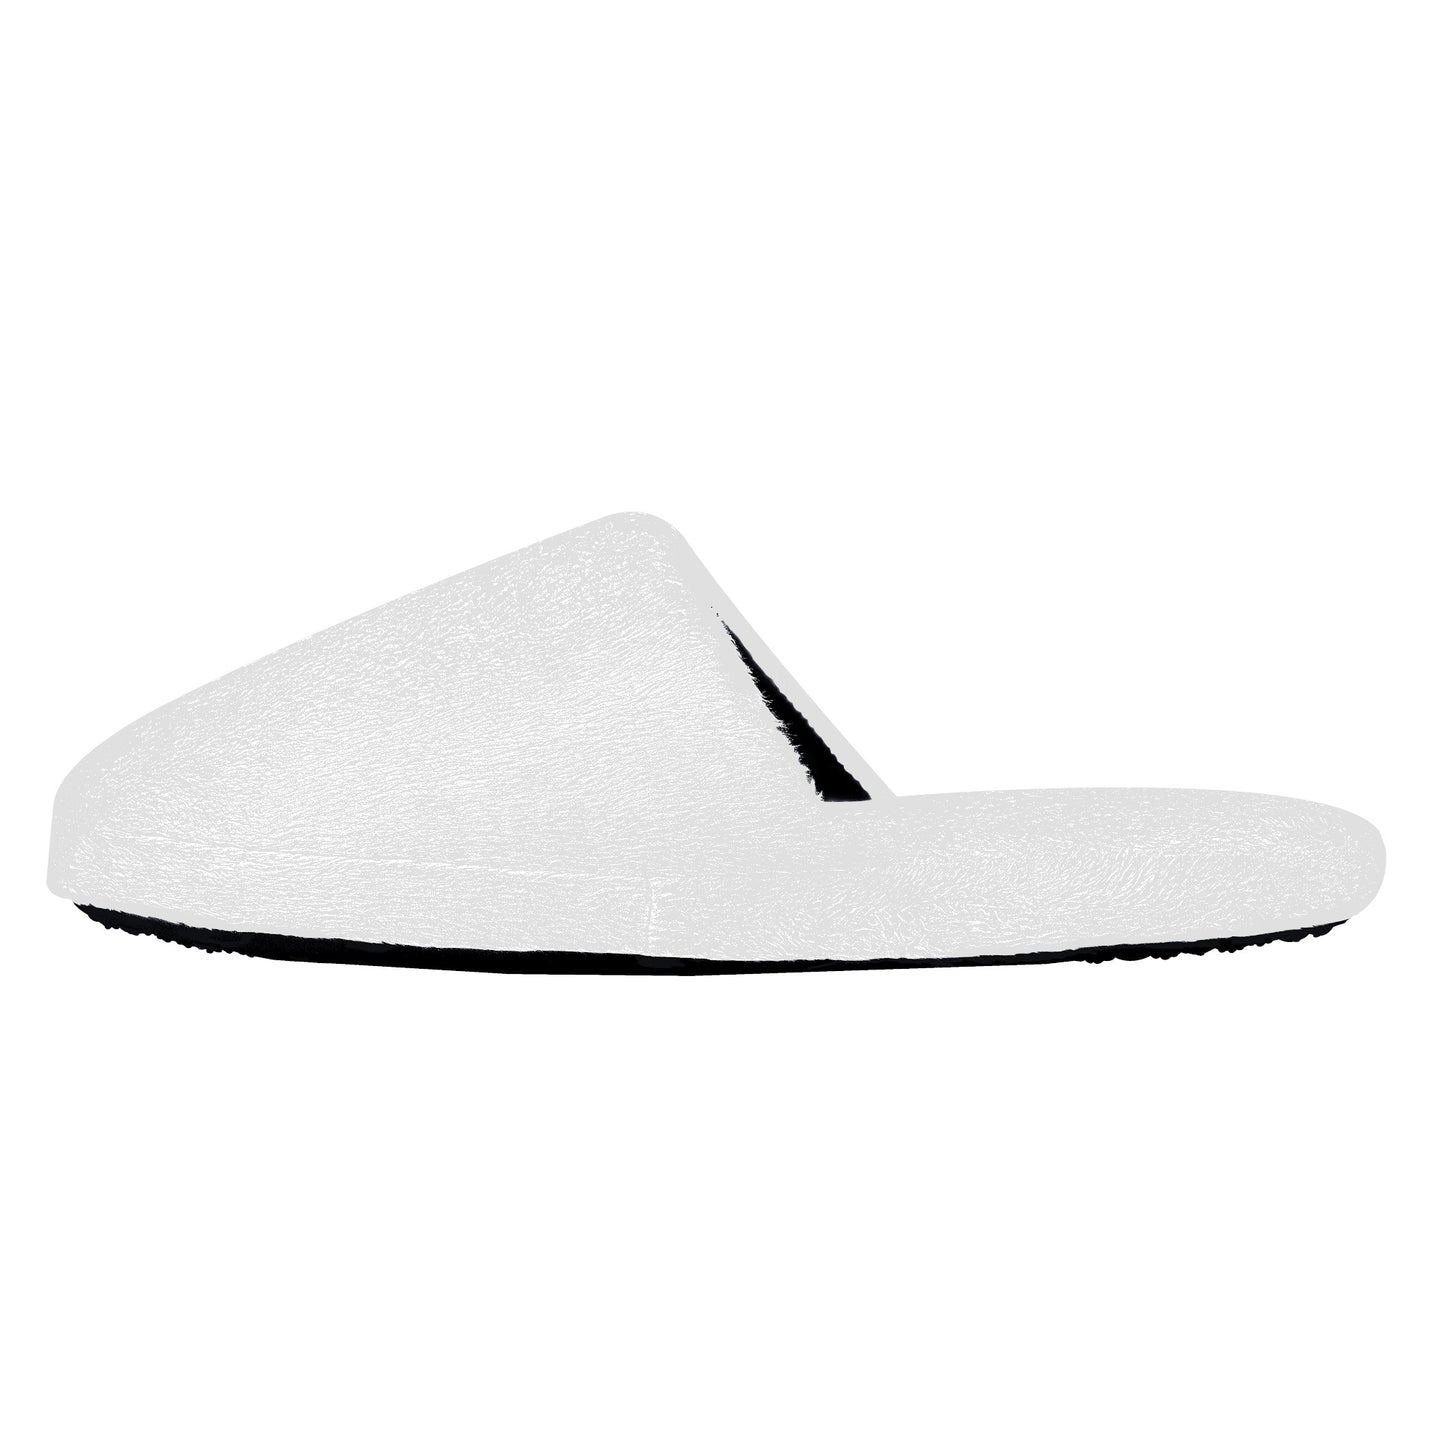 Create Your Own - Slippers - Adult and Kids Sizes